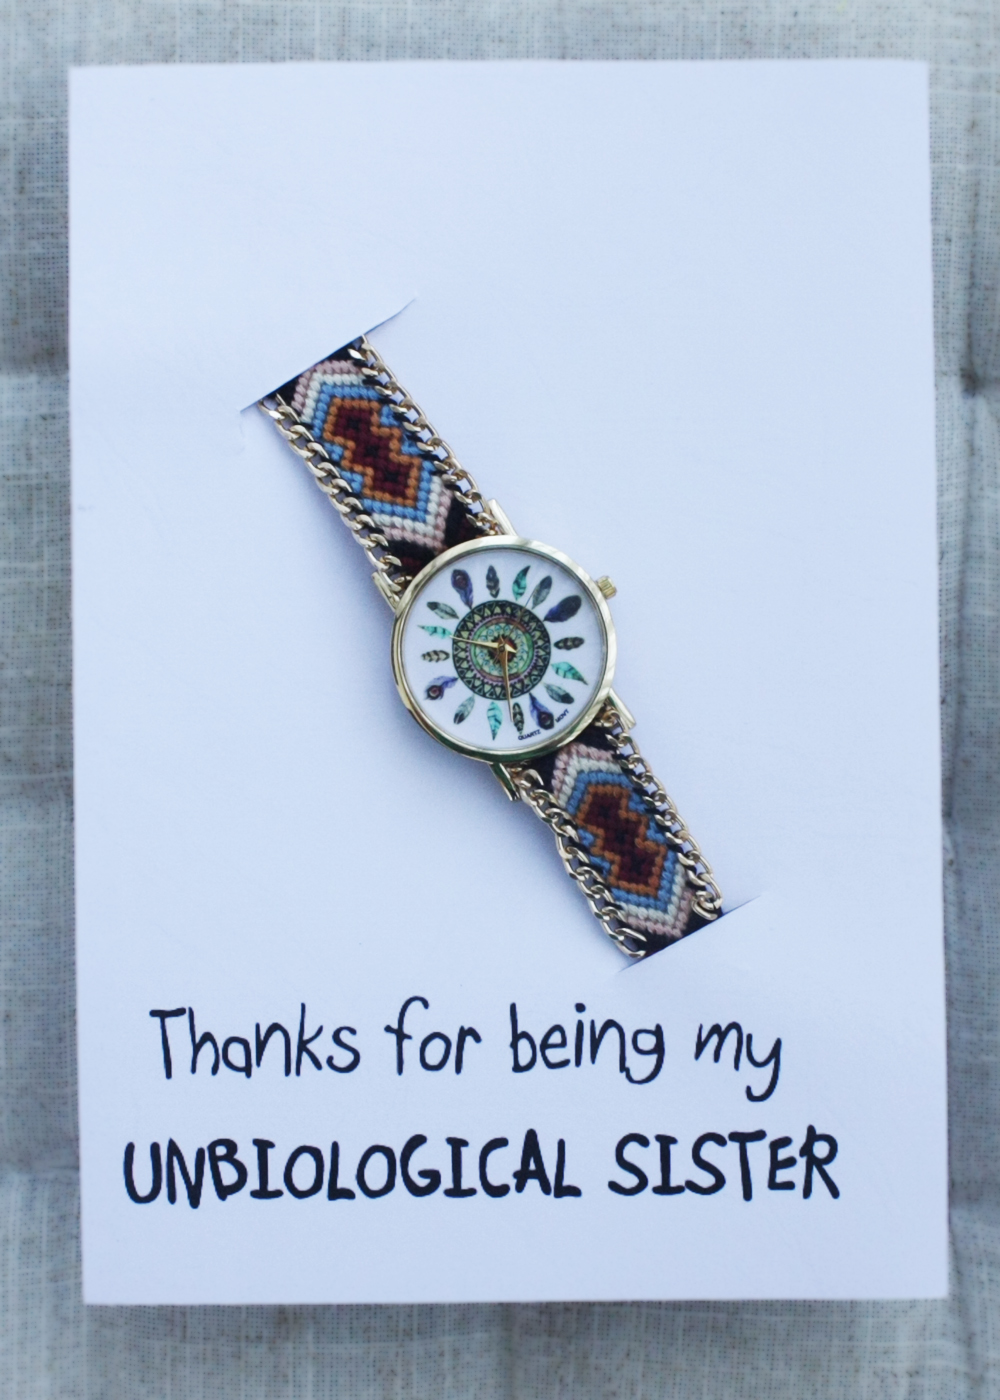 Peacock Face Friendship Wrist Giftthanks For Being My Unbiological Sister Card Watch